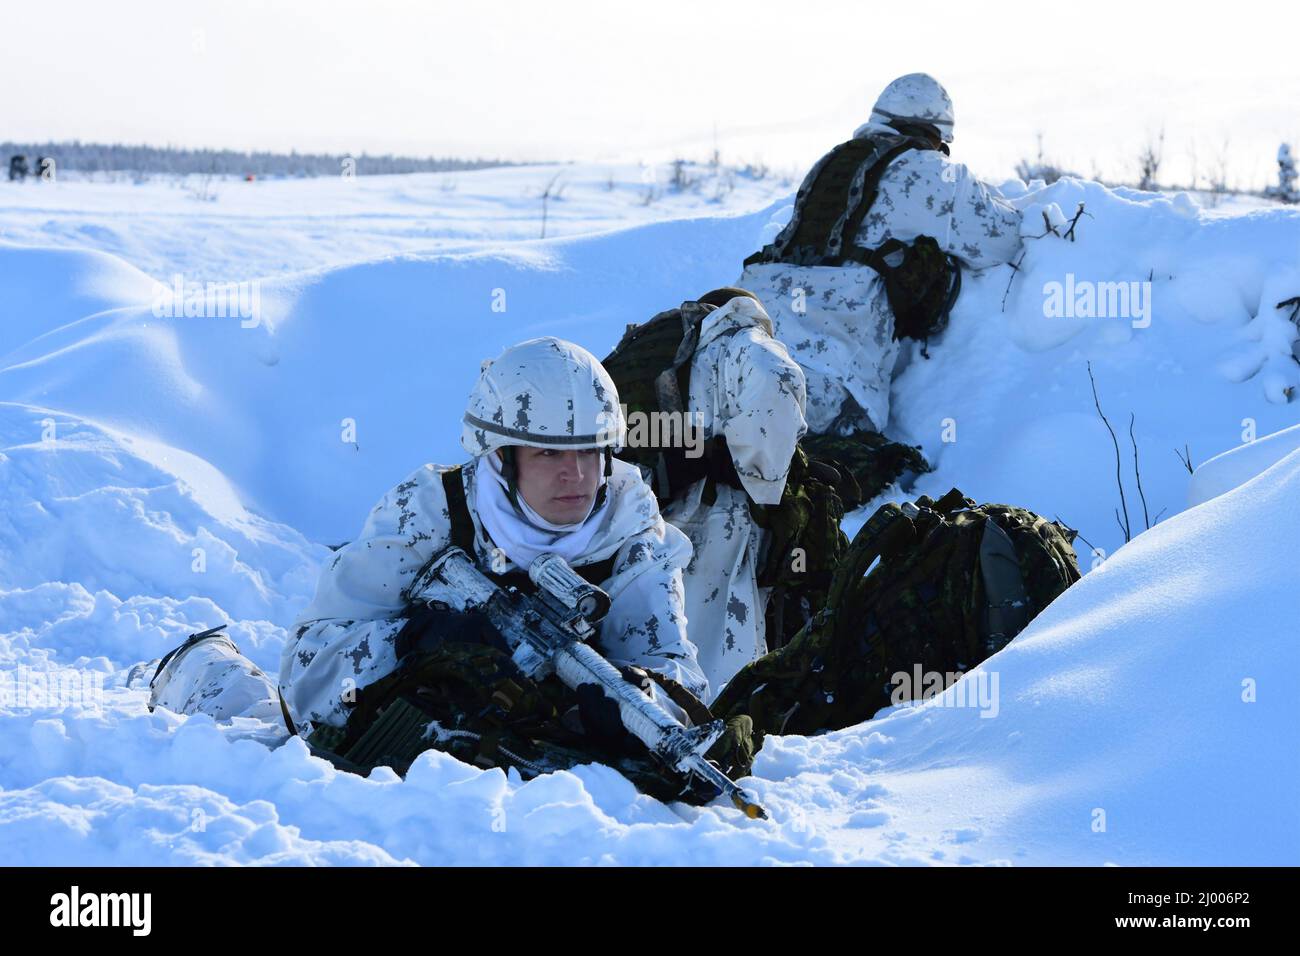 Fort Greely, United States. 09 March, 2021. Canadian army paratroopers set up a defensive perimeter during a Joint Forcible Entry Operation part of Exercise Arctic Edge at the Donnelly Drop Zone March 11, 2022 in Fort Greely, Alaska.  Credit: John Pennell/U.S. Army/Alamy Live News Stock Photo